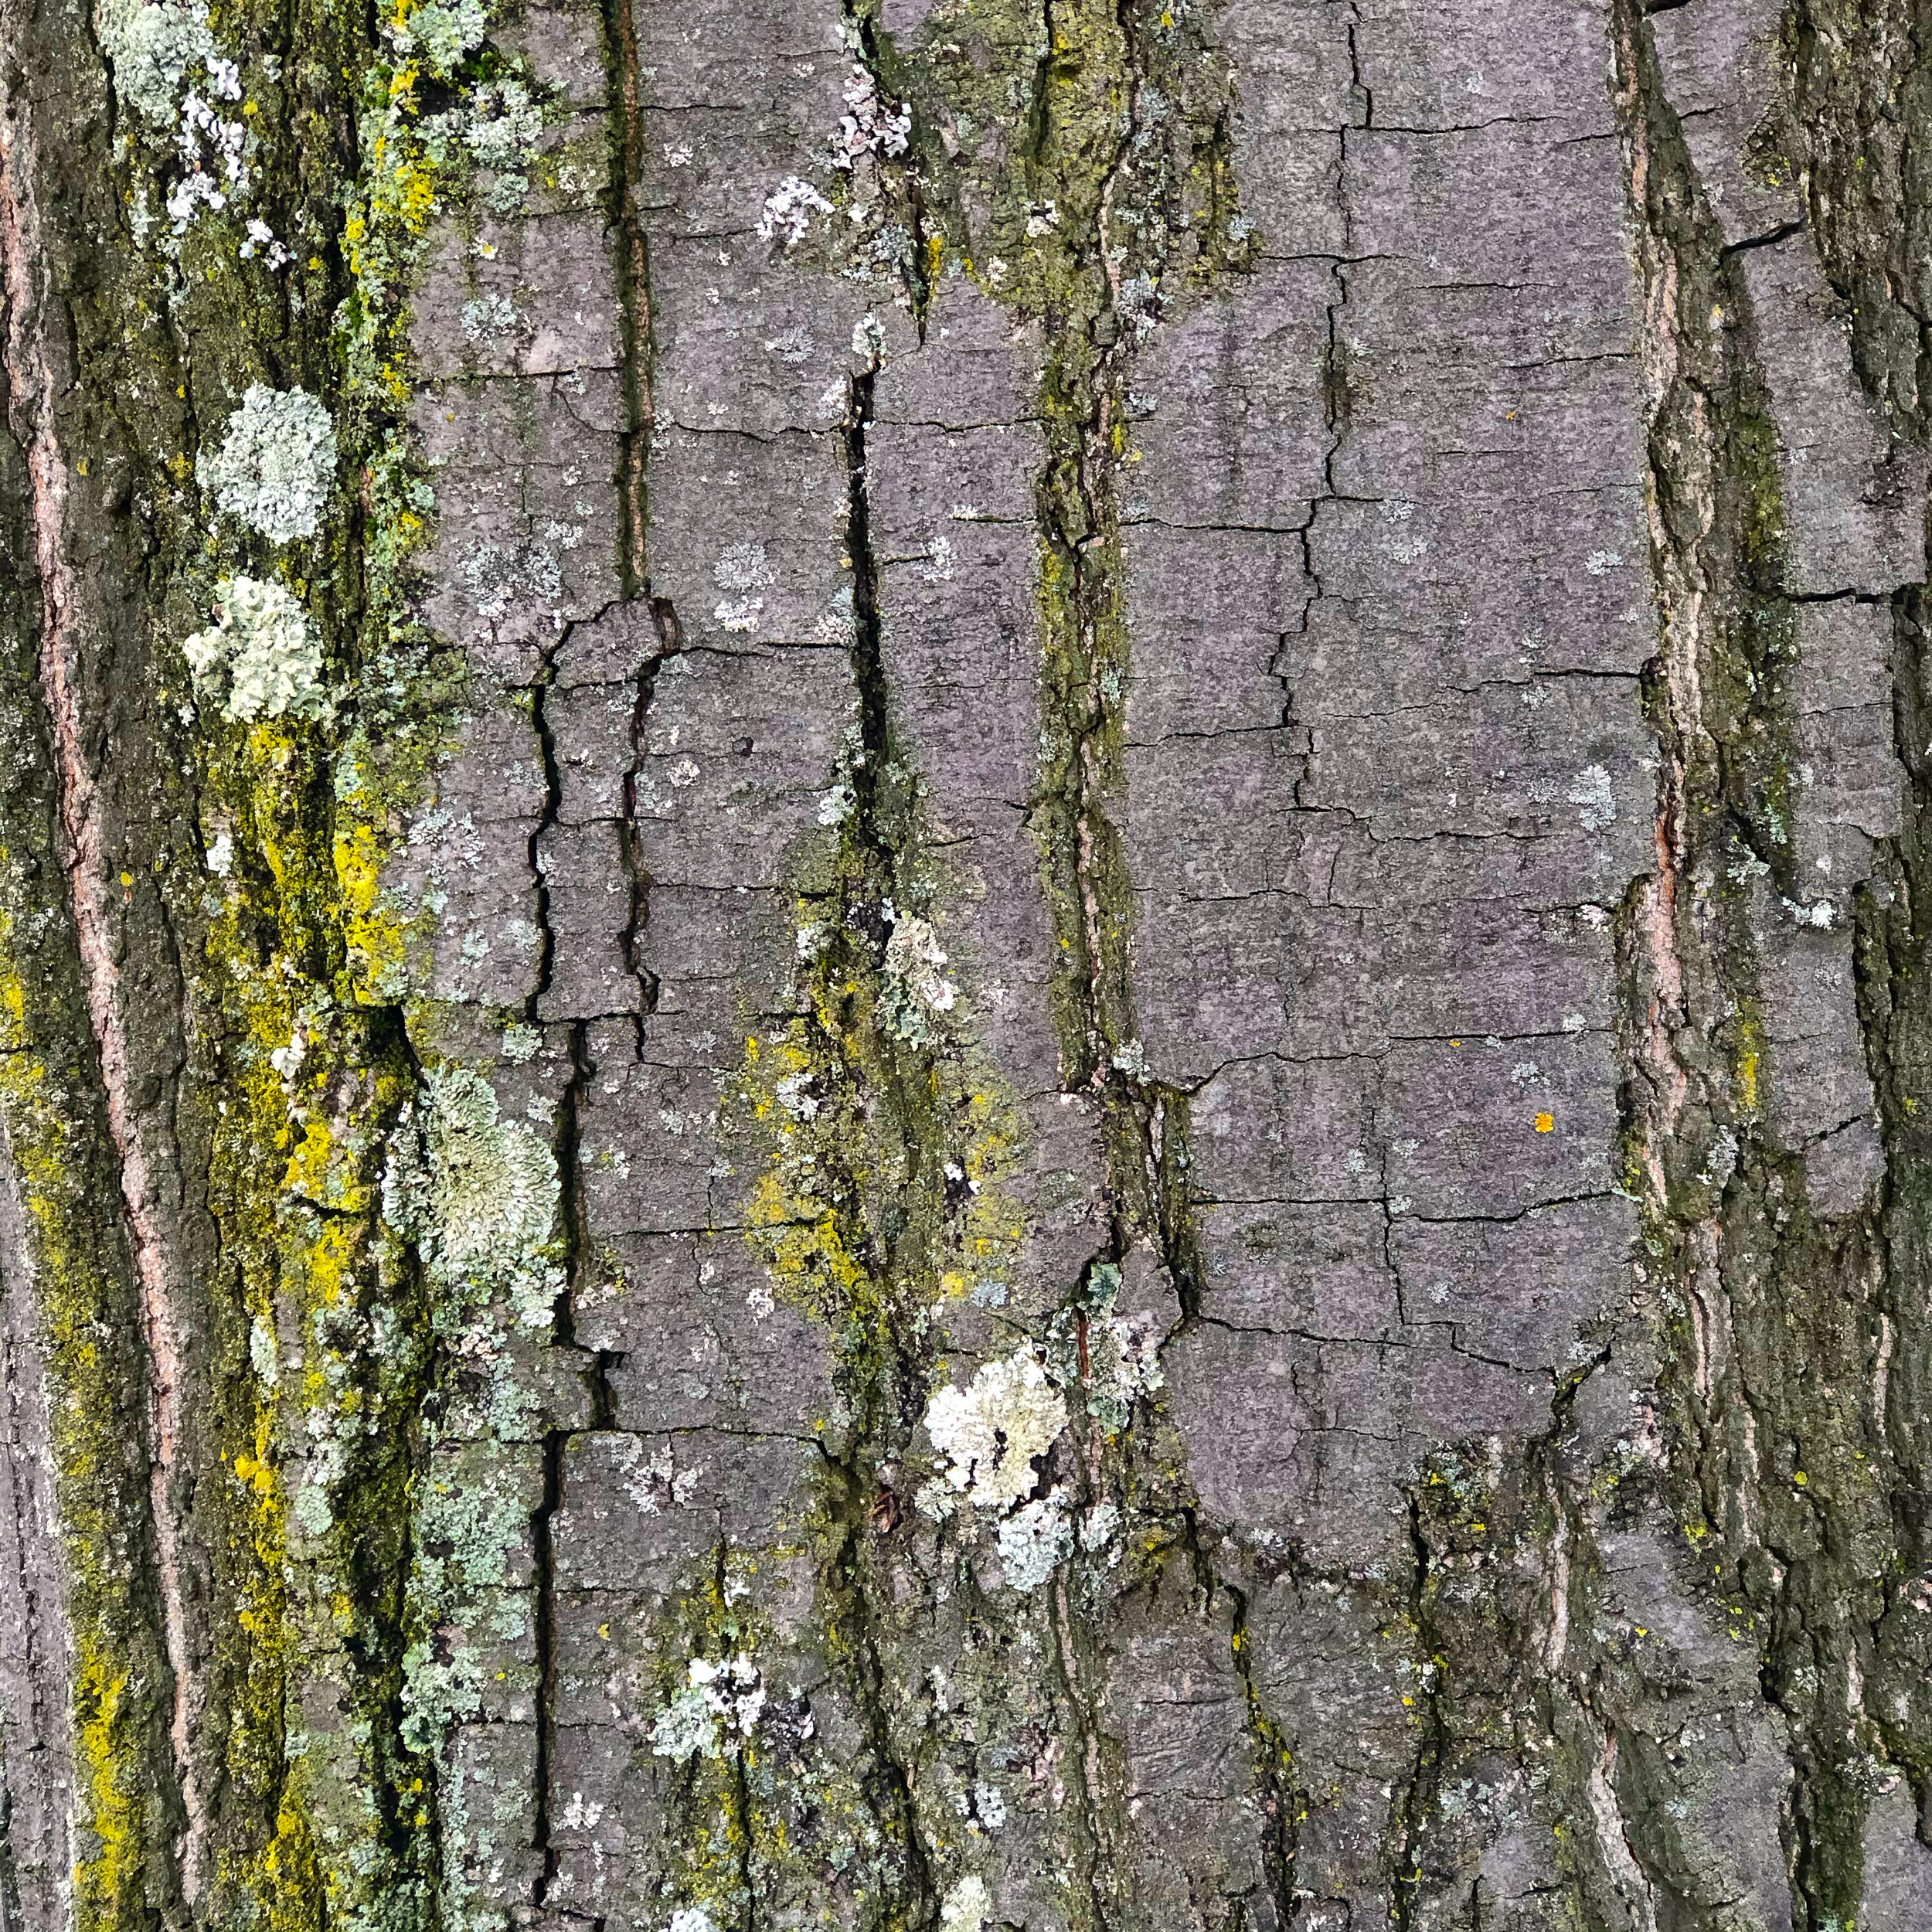 Bark’s structure